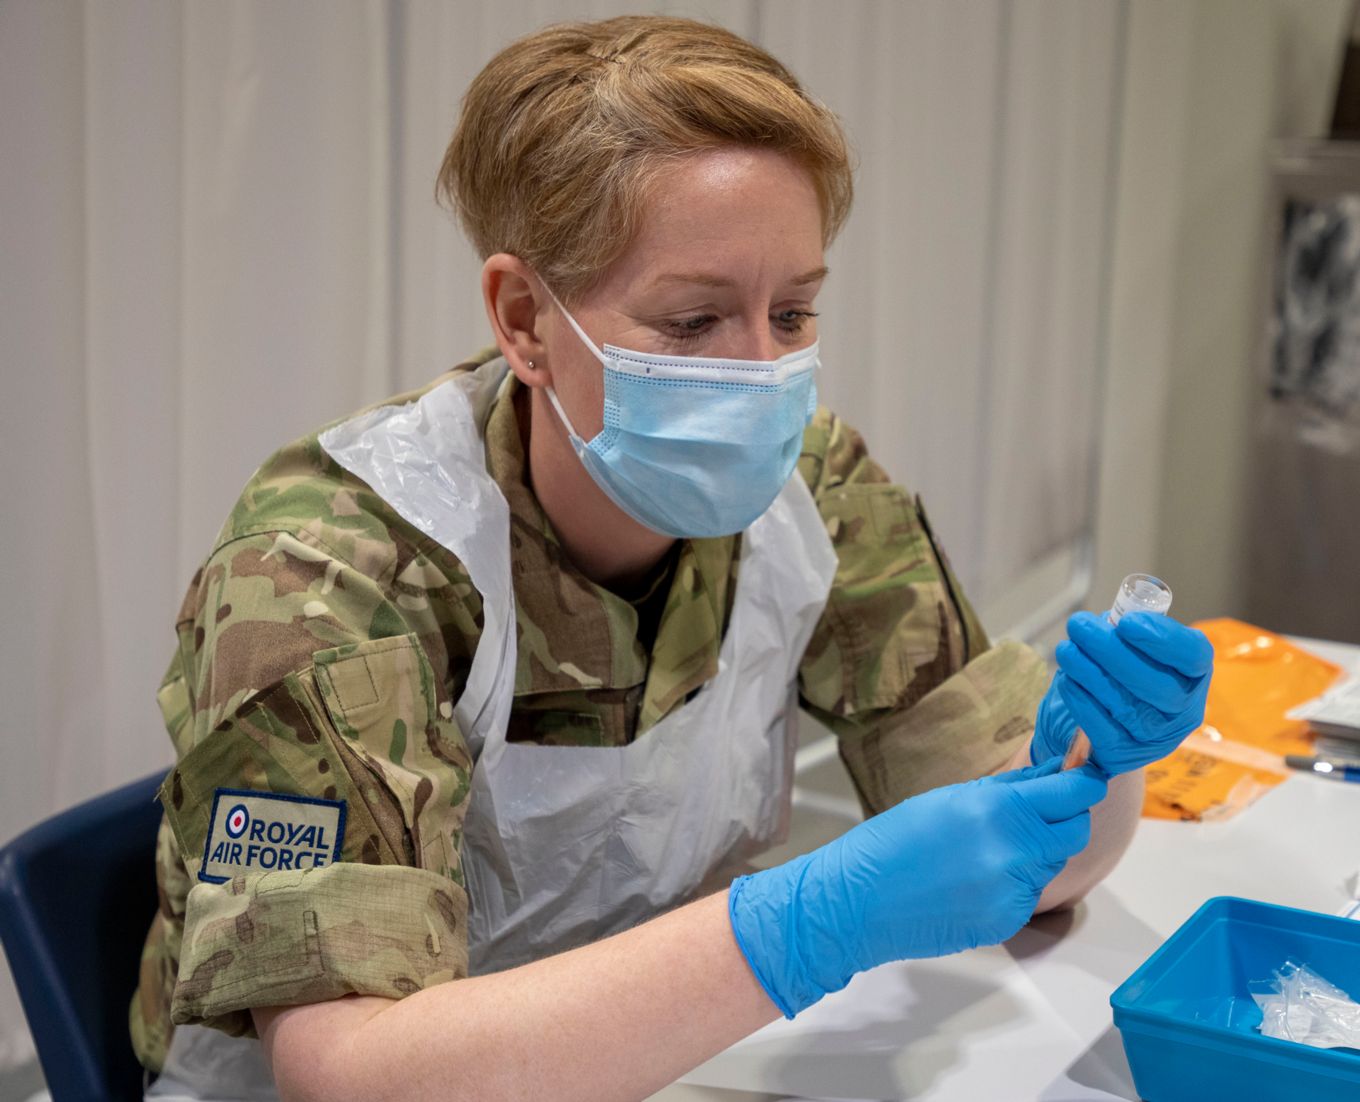 Image shows RAF personnel at a COVID vaccination centre.